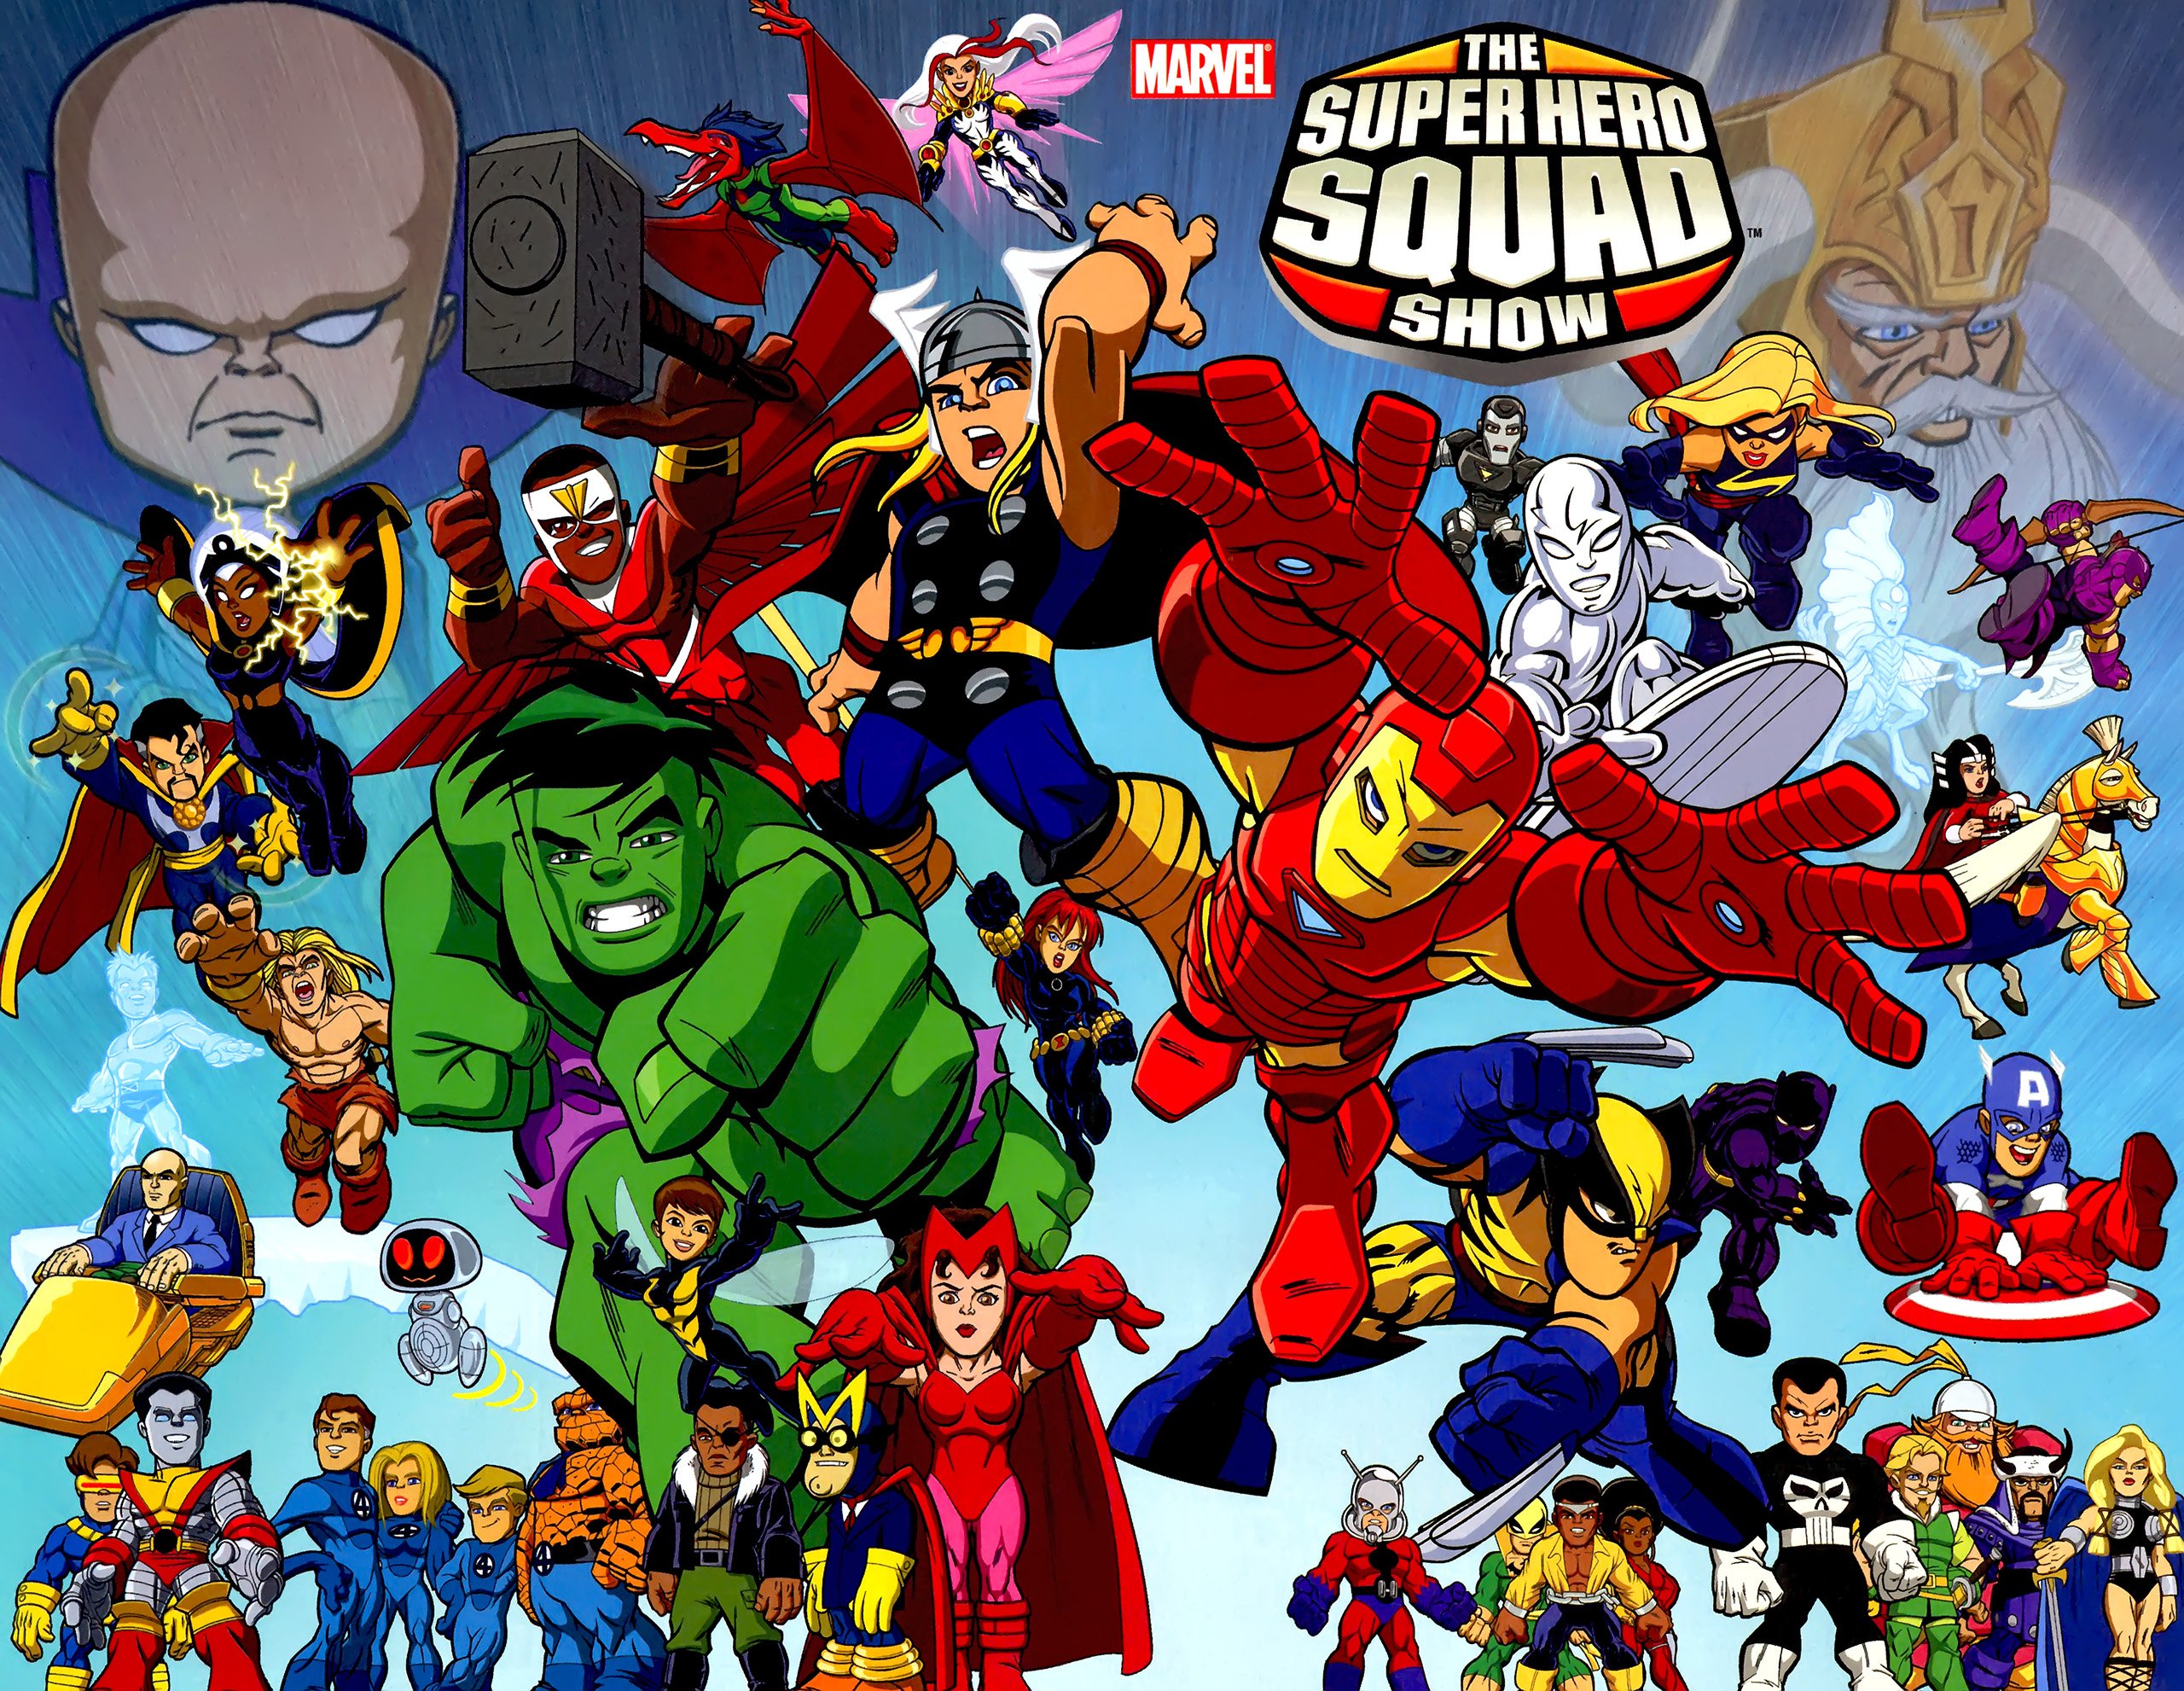 The Super Hero Squad Show Hd Wallpaper Background Image 2560x1982